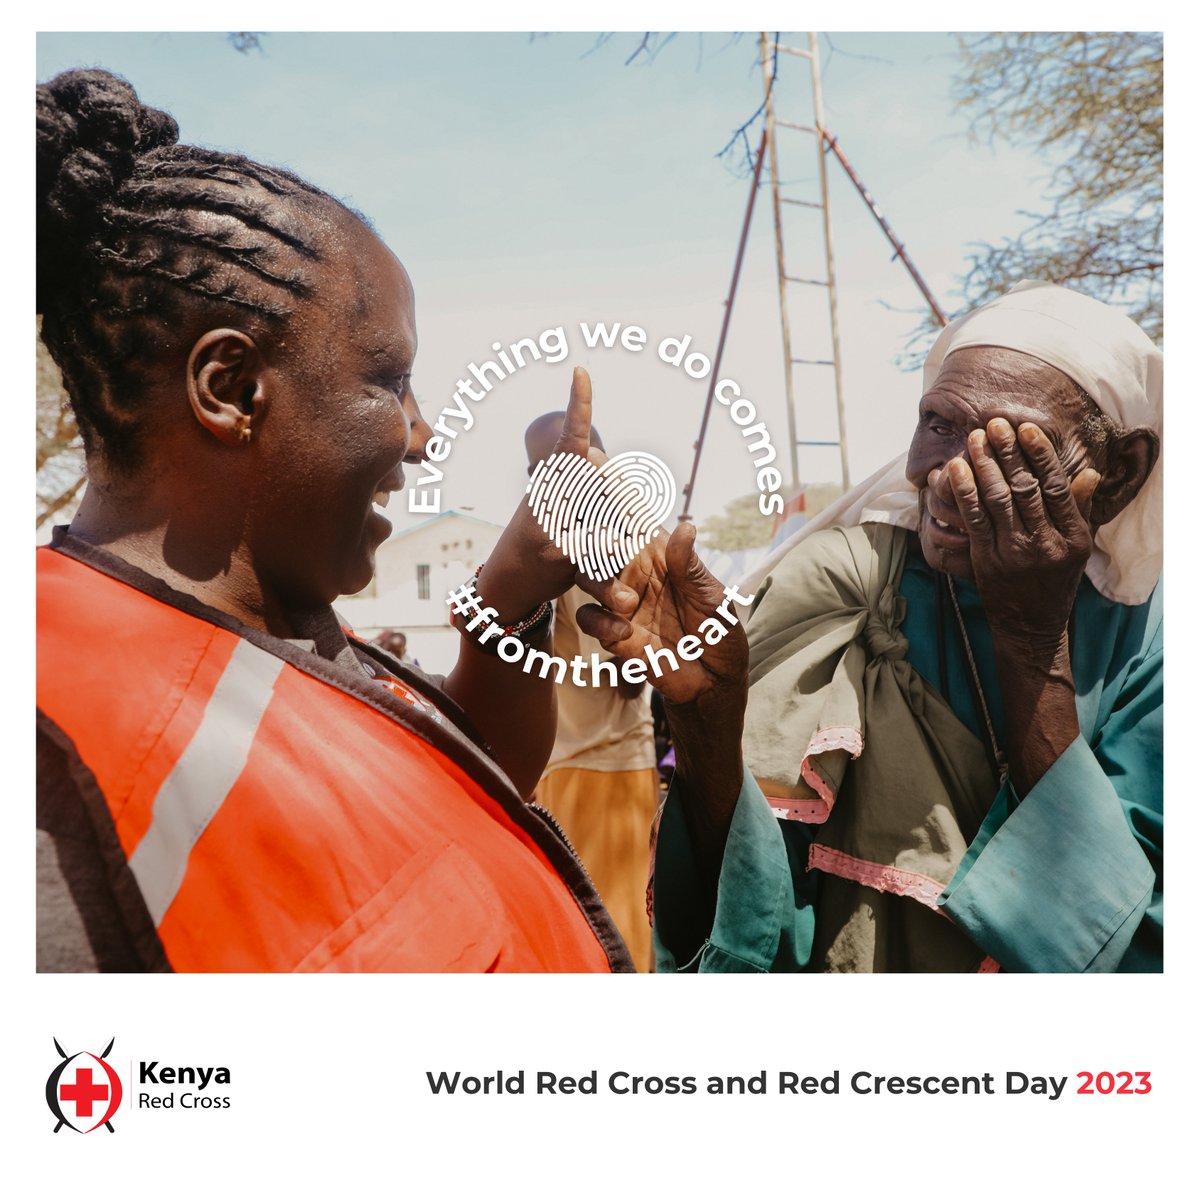 As we wrap up the #WorldRedCrossDay celebrations, let us keep in mind that compassion for others should be a genuine expression that stems #FromTheHeart and woven into our daily lives.

Here are some highlights from our commemoration today: